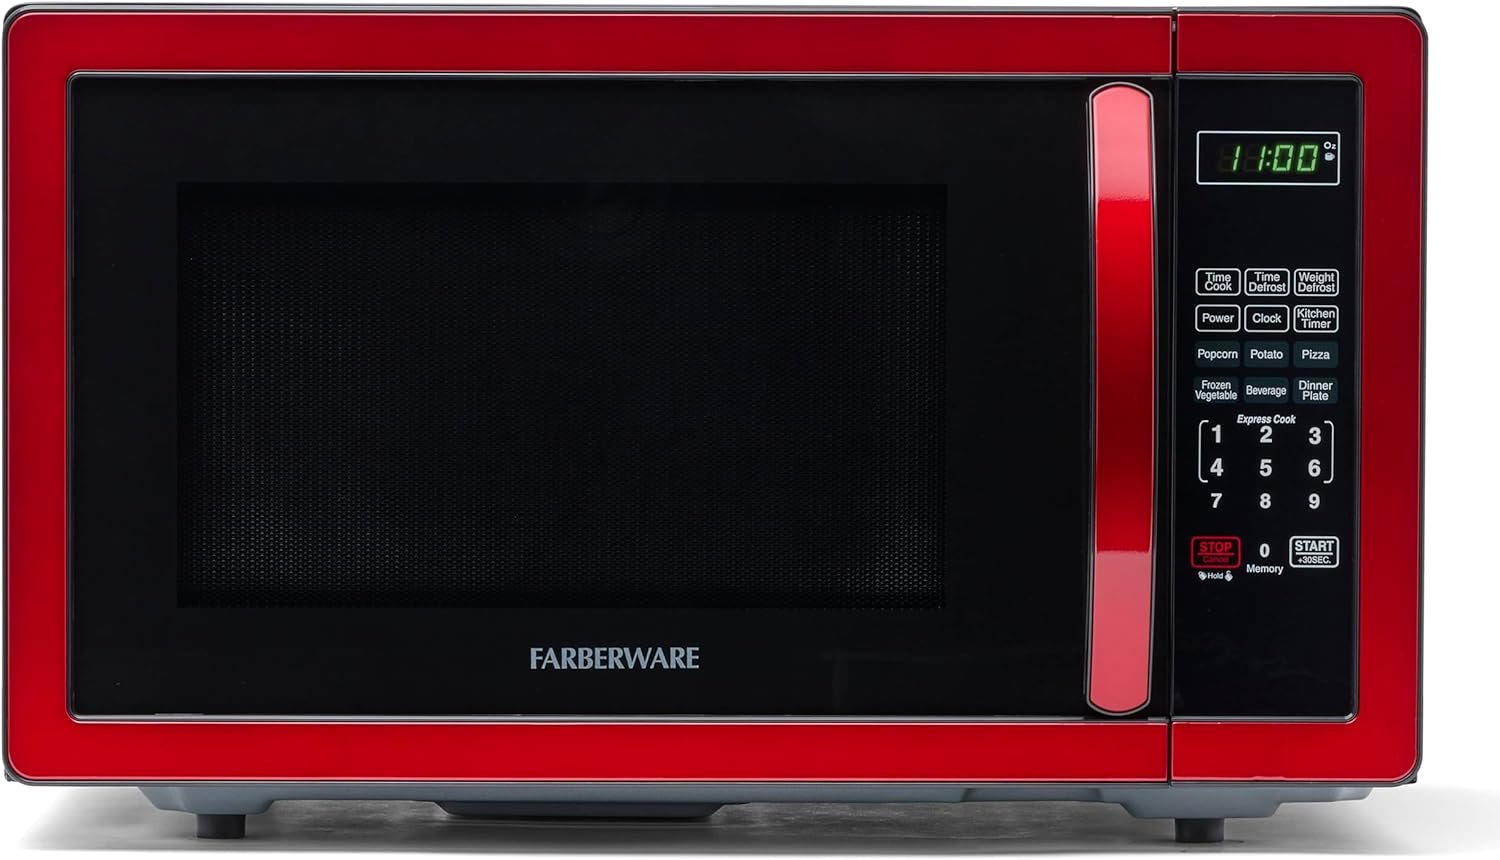 Farberware Countertop Microwave 1000 Watts, 1.1 cu ft - Microwave Oven With LED Lighting and Child Lock - Perfect for Apartments and Dorms - Easy Clean Stainless Steel